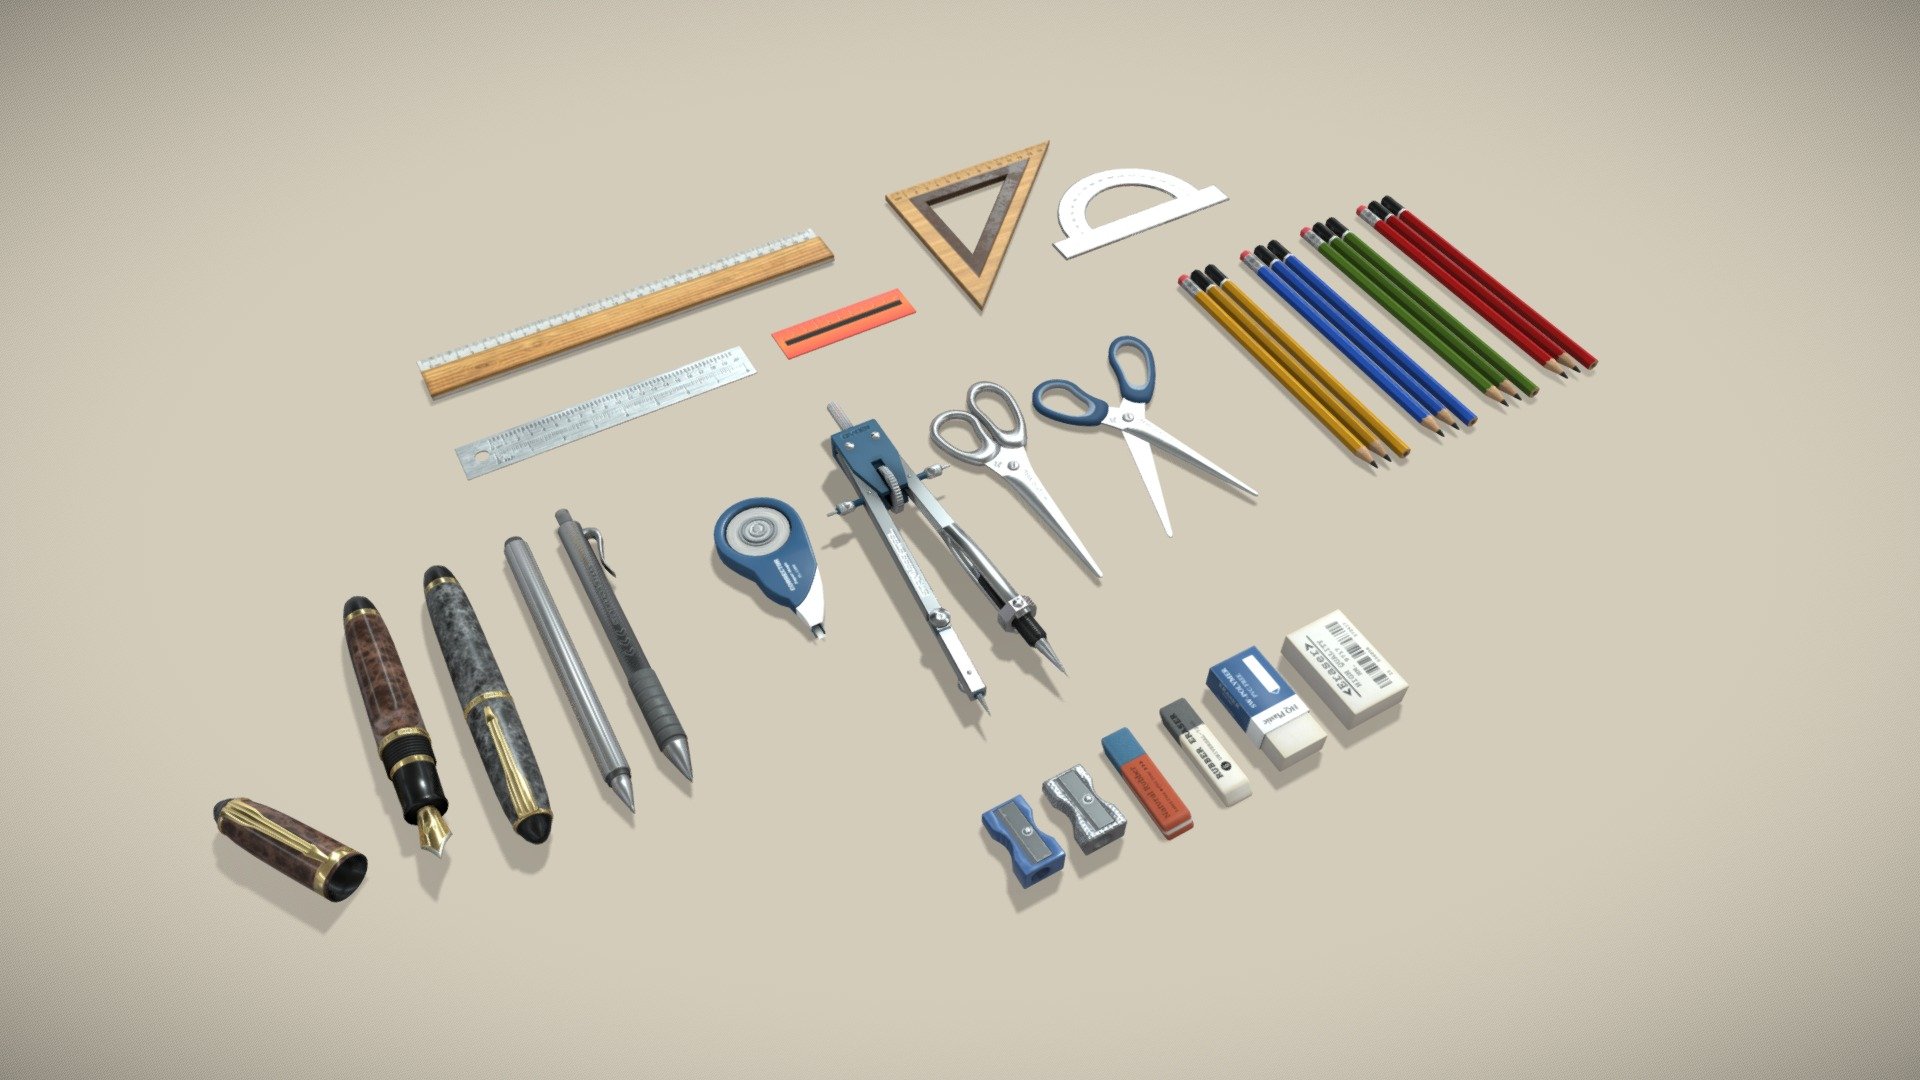 School supplies 3D model (pack) includes:


4 different pens and pencils
2 different scissors
1 divider
1 pen corrector
3 different rulers
1 wooden triangle
1 protractor
3 different pencil types
4 different colors
4 different eraser designs
2 different pencil sharpener designs

All textures and materials are included and mapped in every format. The model is completely ready for use visualization in any 3d software and engine.

Technical details:


File formats included in the package are: FBX, OBJ, ABC, PLY, STL, x3d, BLEND, gLTF (generated), USDZ (generated)
Native software file format: BLEND
Polygons: 12,034
Vertices: 11,508
Textures: Color, Metallic, Roughness, Normal.
All textures are 2k resolution
All files are in the .rar file.
 - School supplies Mega Pack Low-poly 3D model - Buy Royalty Free 3D model by 3DDisco 3d model